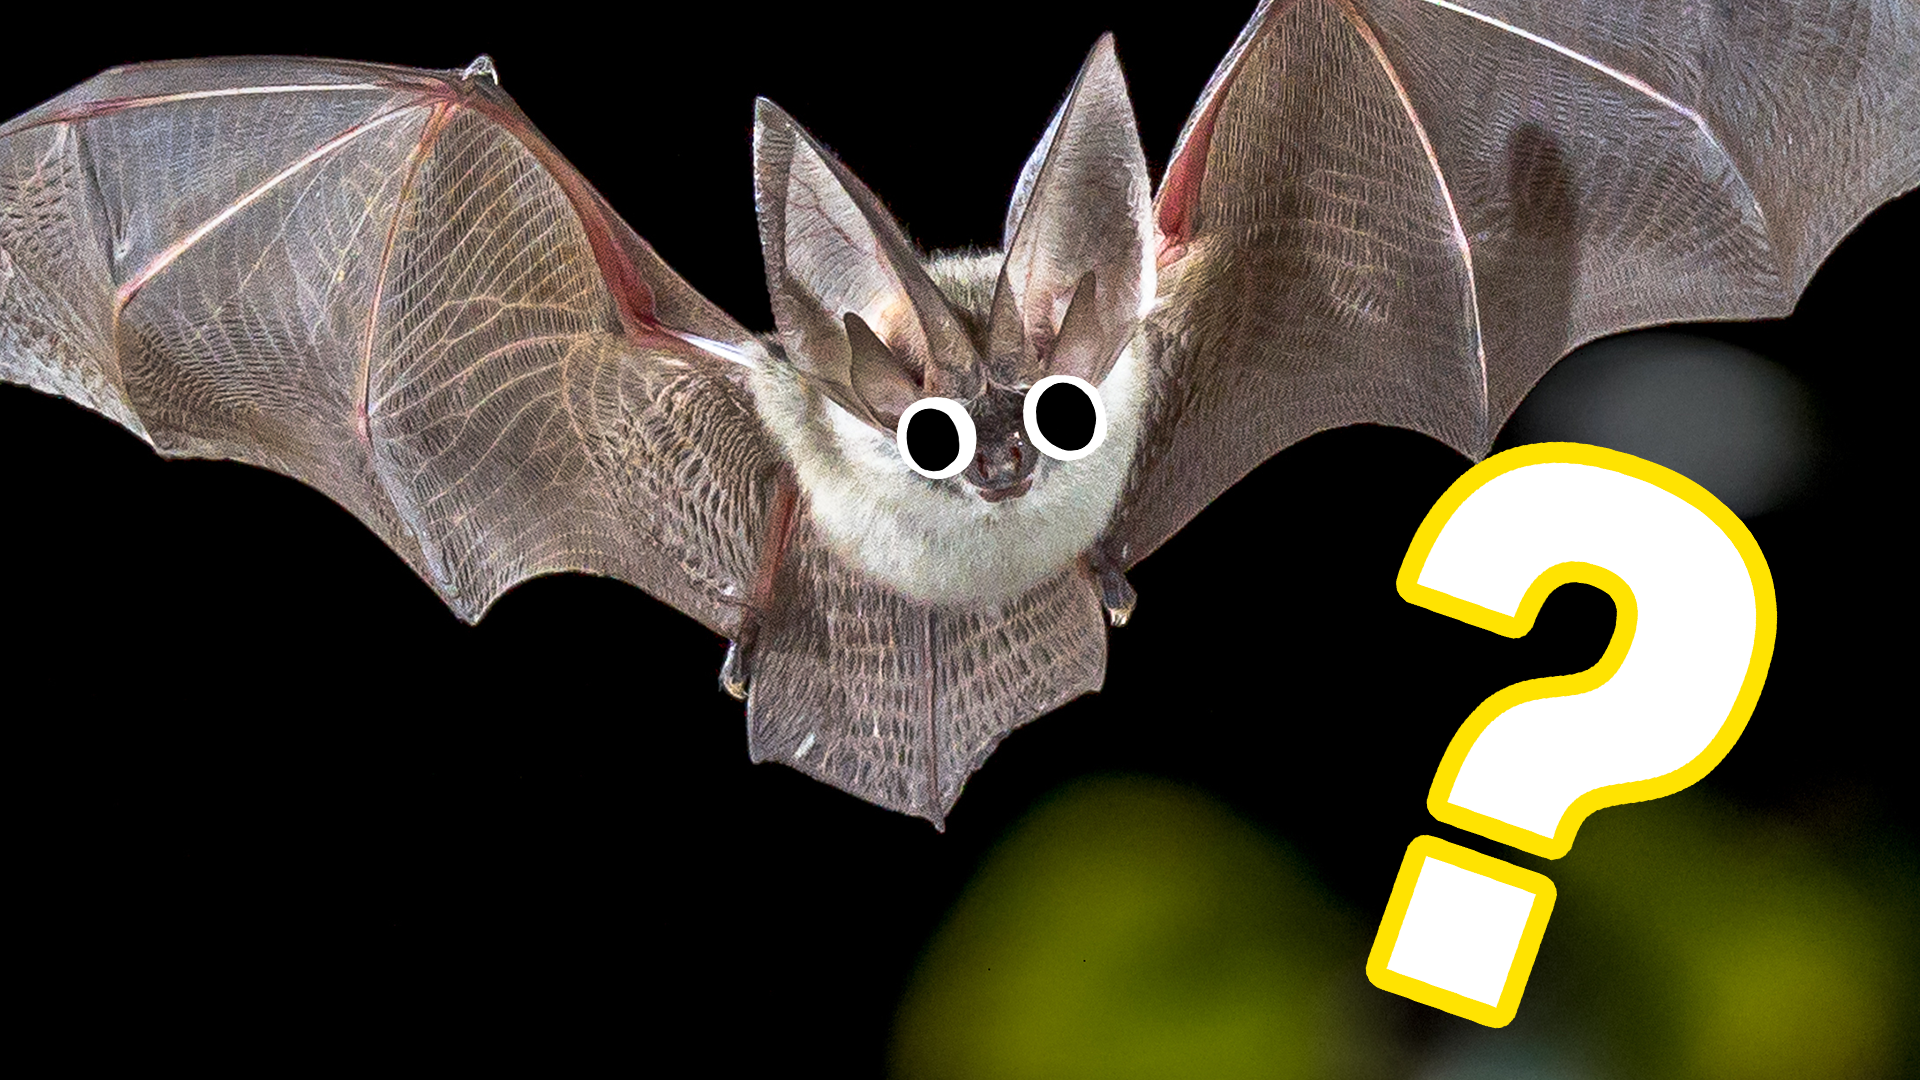 A spooky bat and question mark